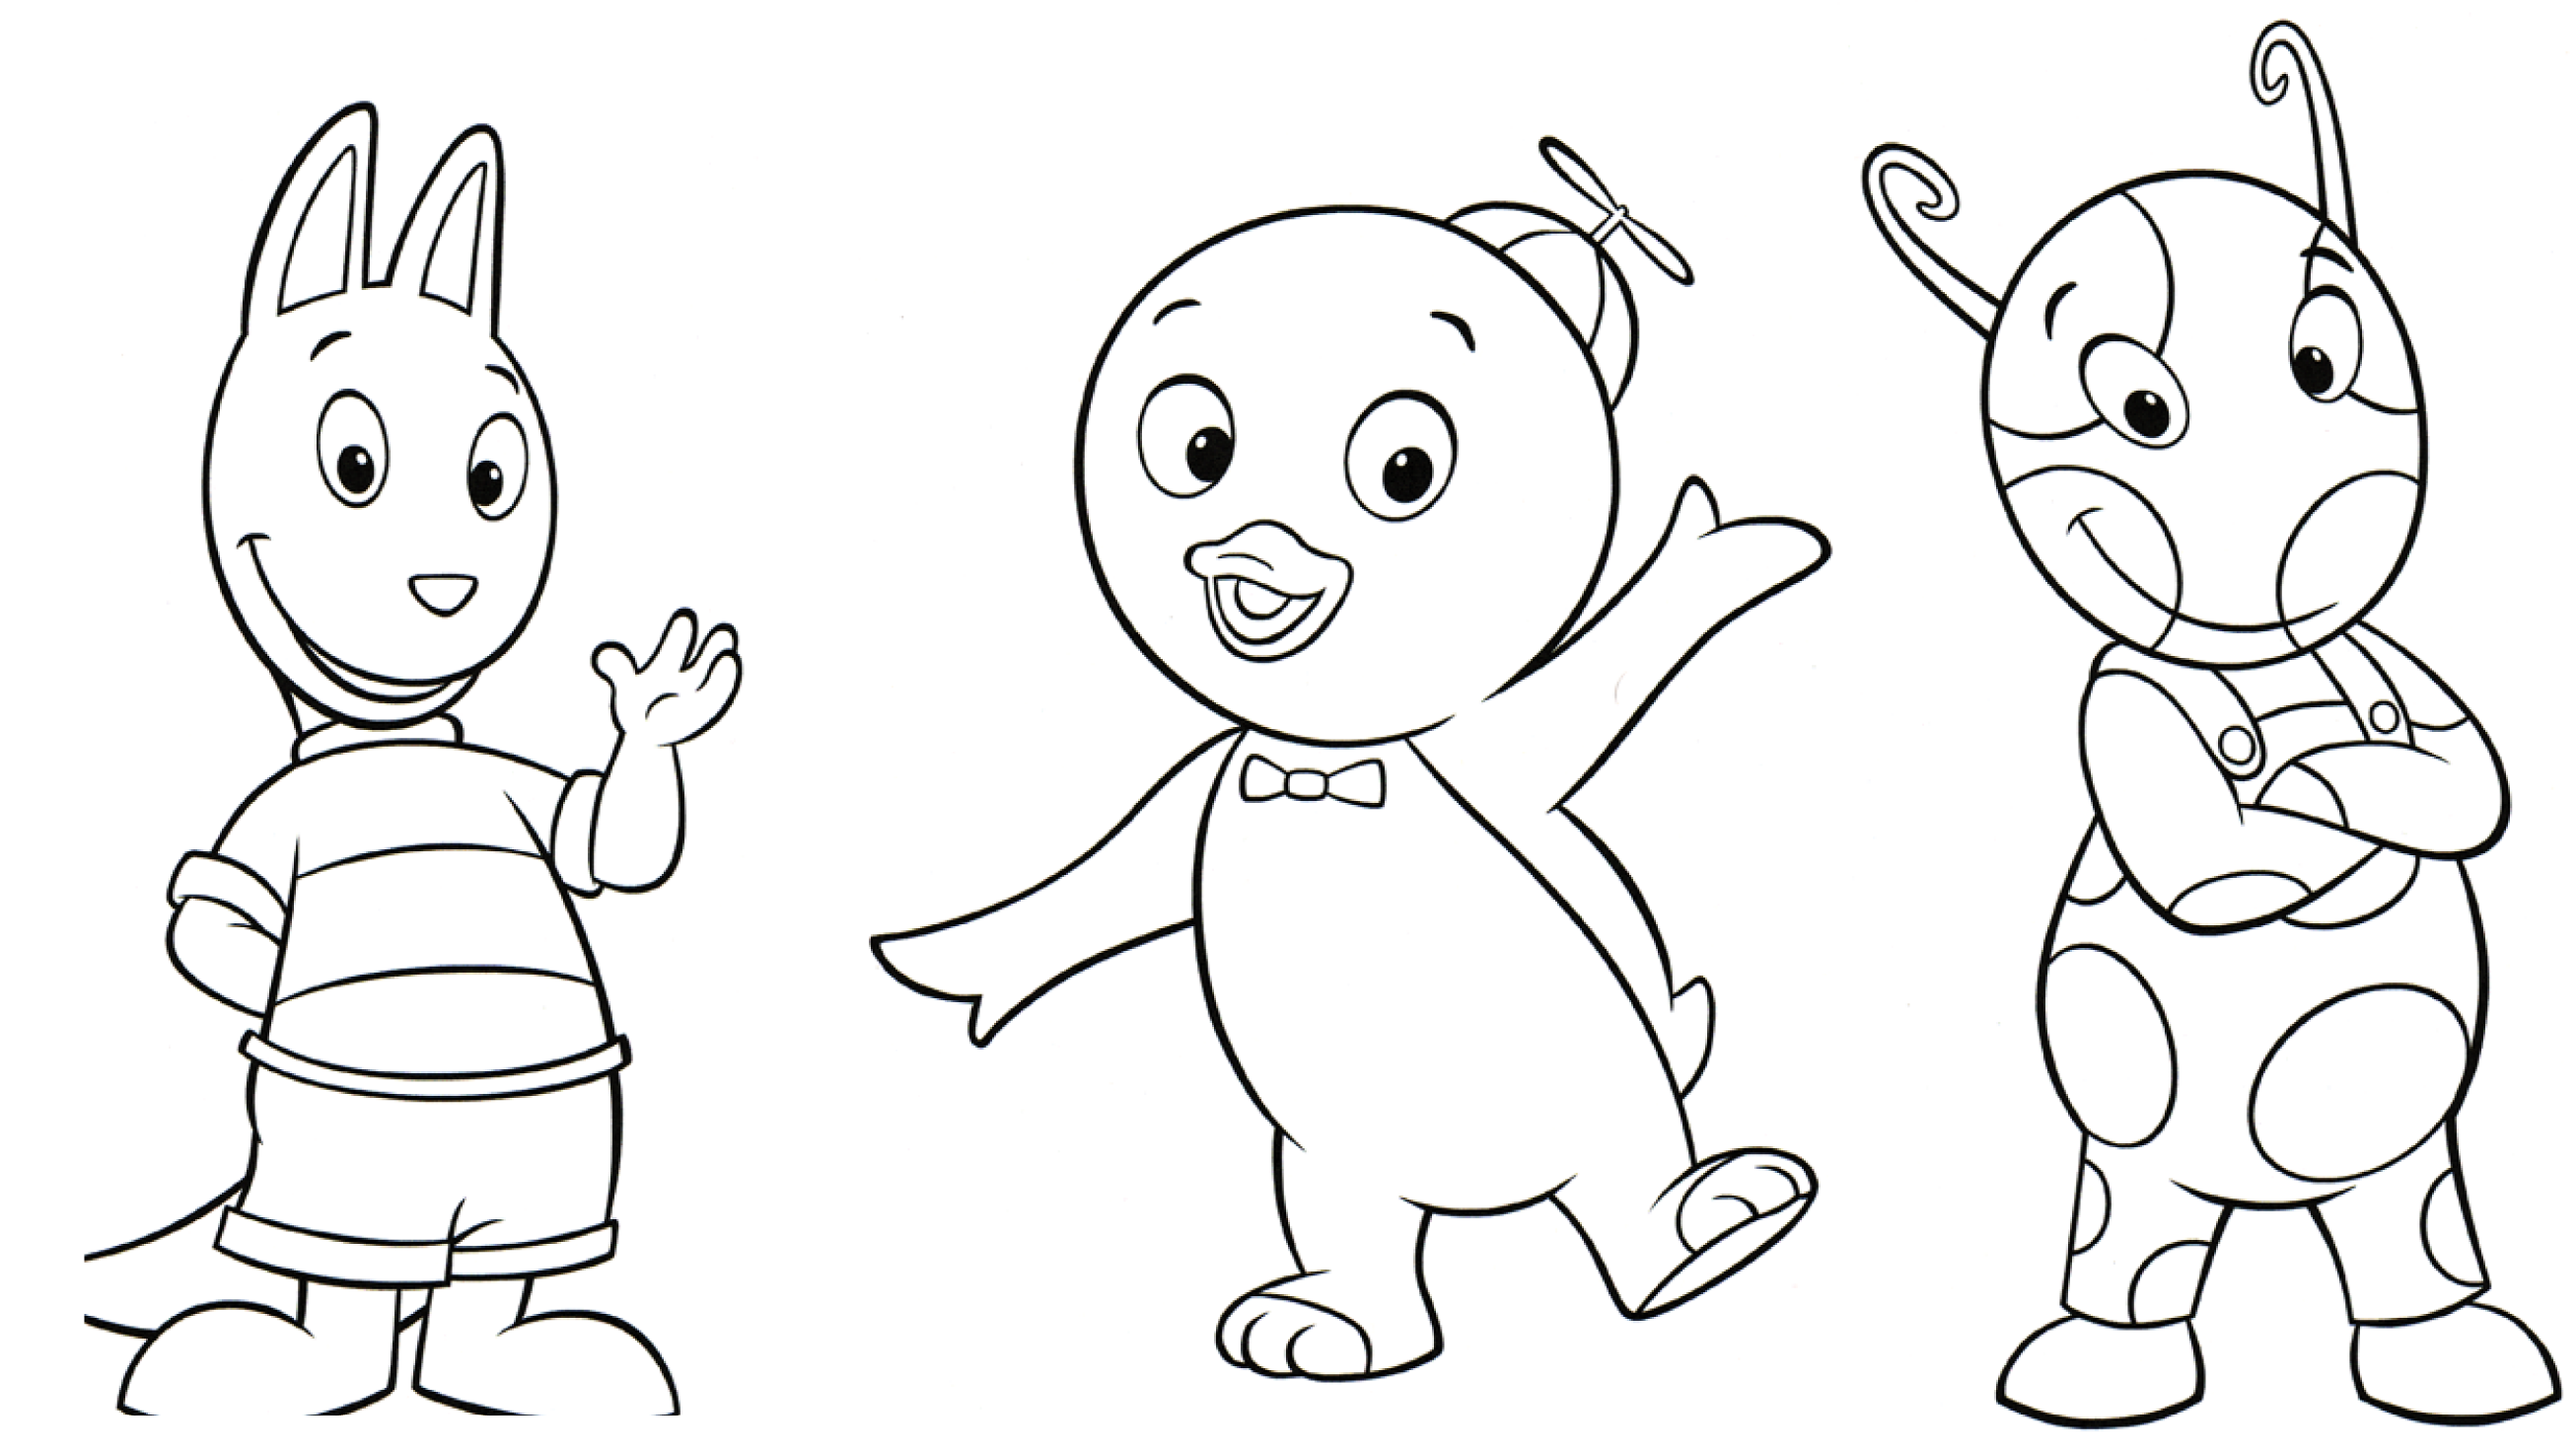 Traceable Cartoon Characters | Cartoon Coloring Pages | Kids ...